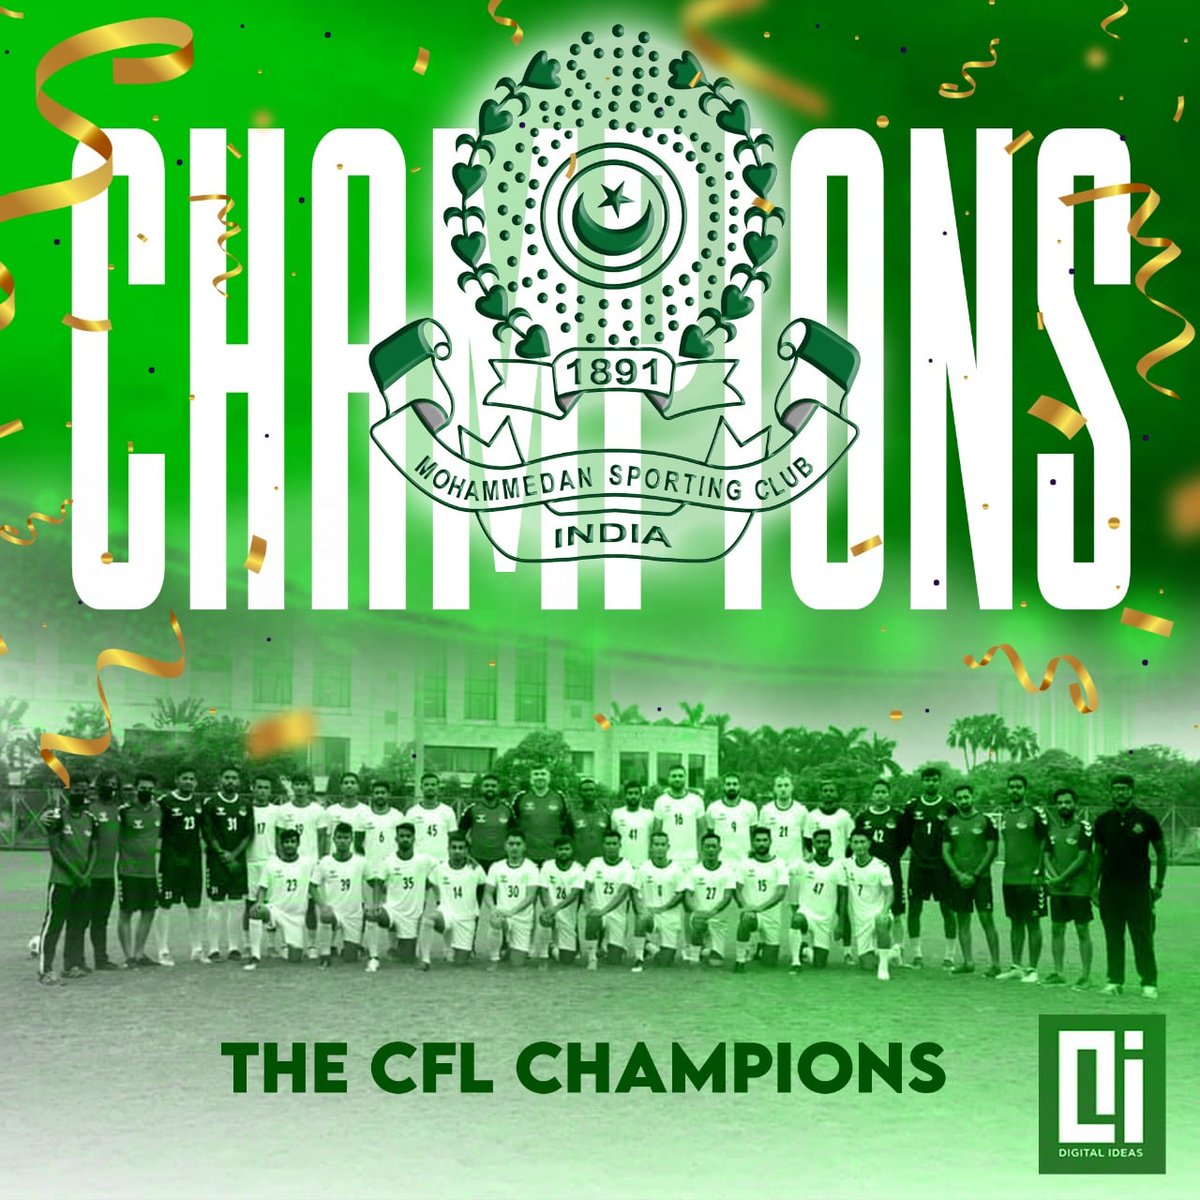 Congratulations @MohammedanSC on being the CFL Champions after 40 long years! 🏆⚽

#Champions #CFL #CFLFinal  #mohammedansportingclub